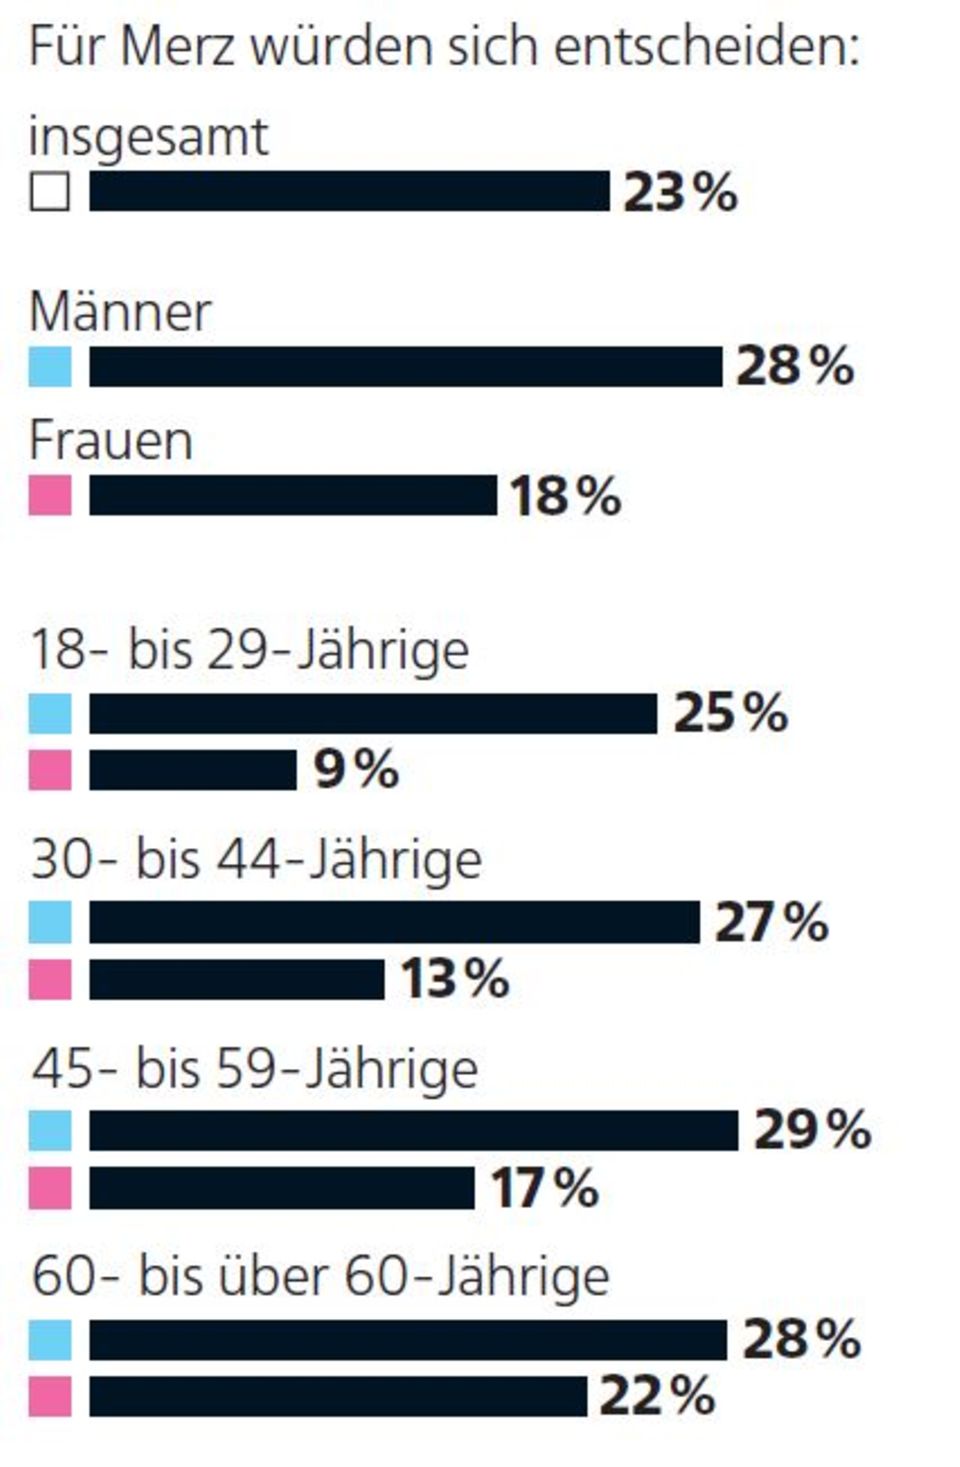 stern survey: Fritz, the womanizer: Only 9 percent of young women would vote for Merz as chancellor